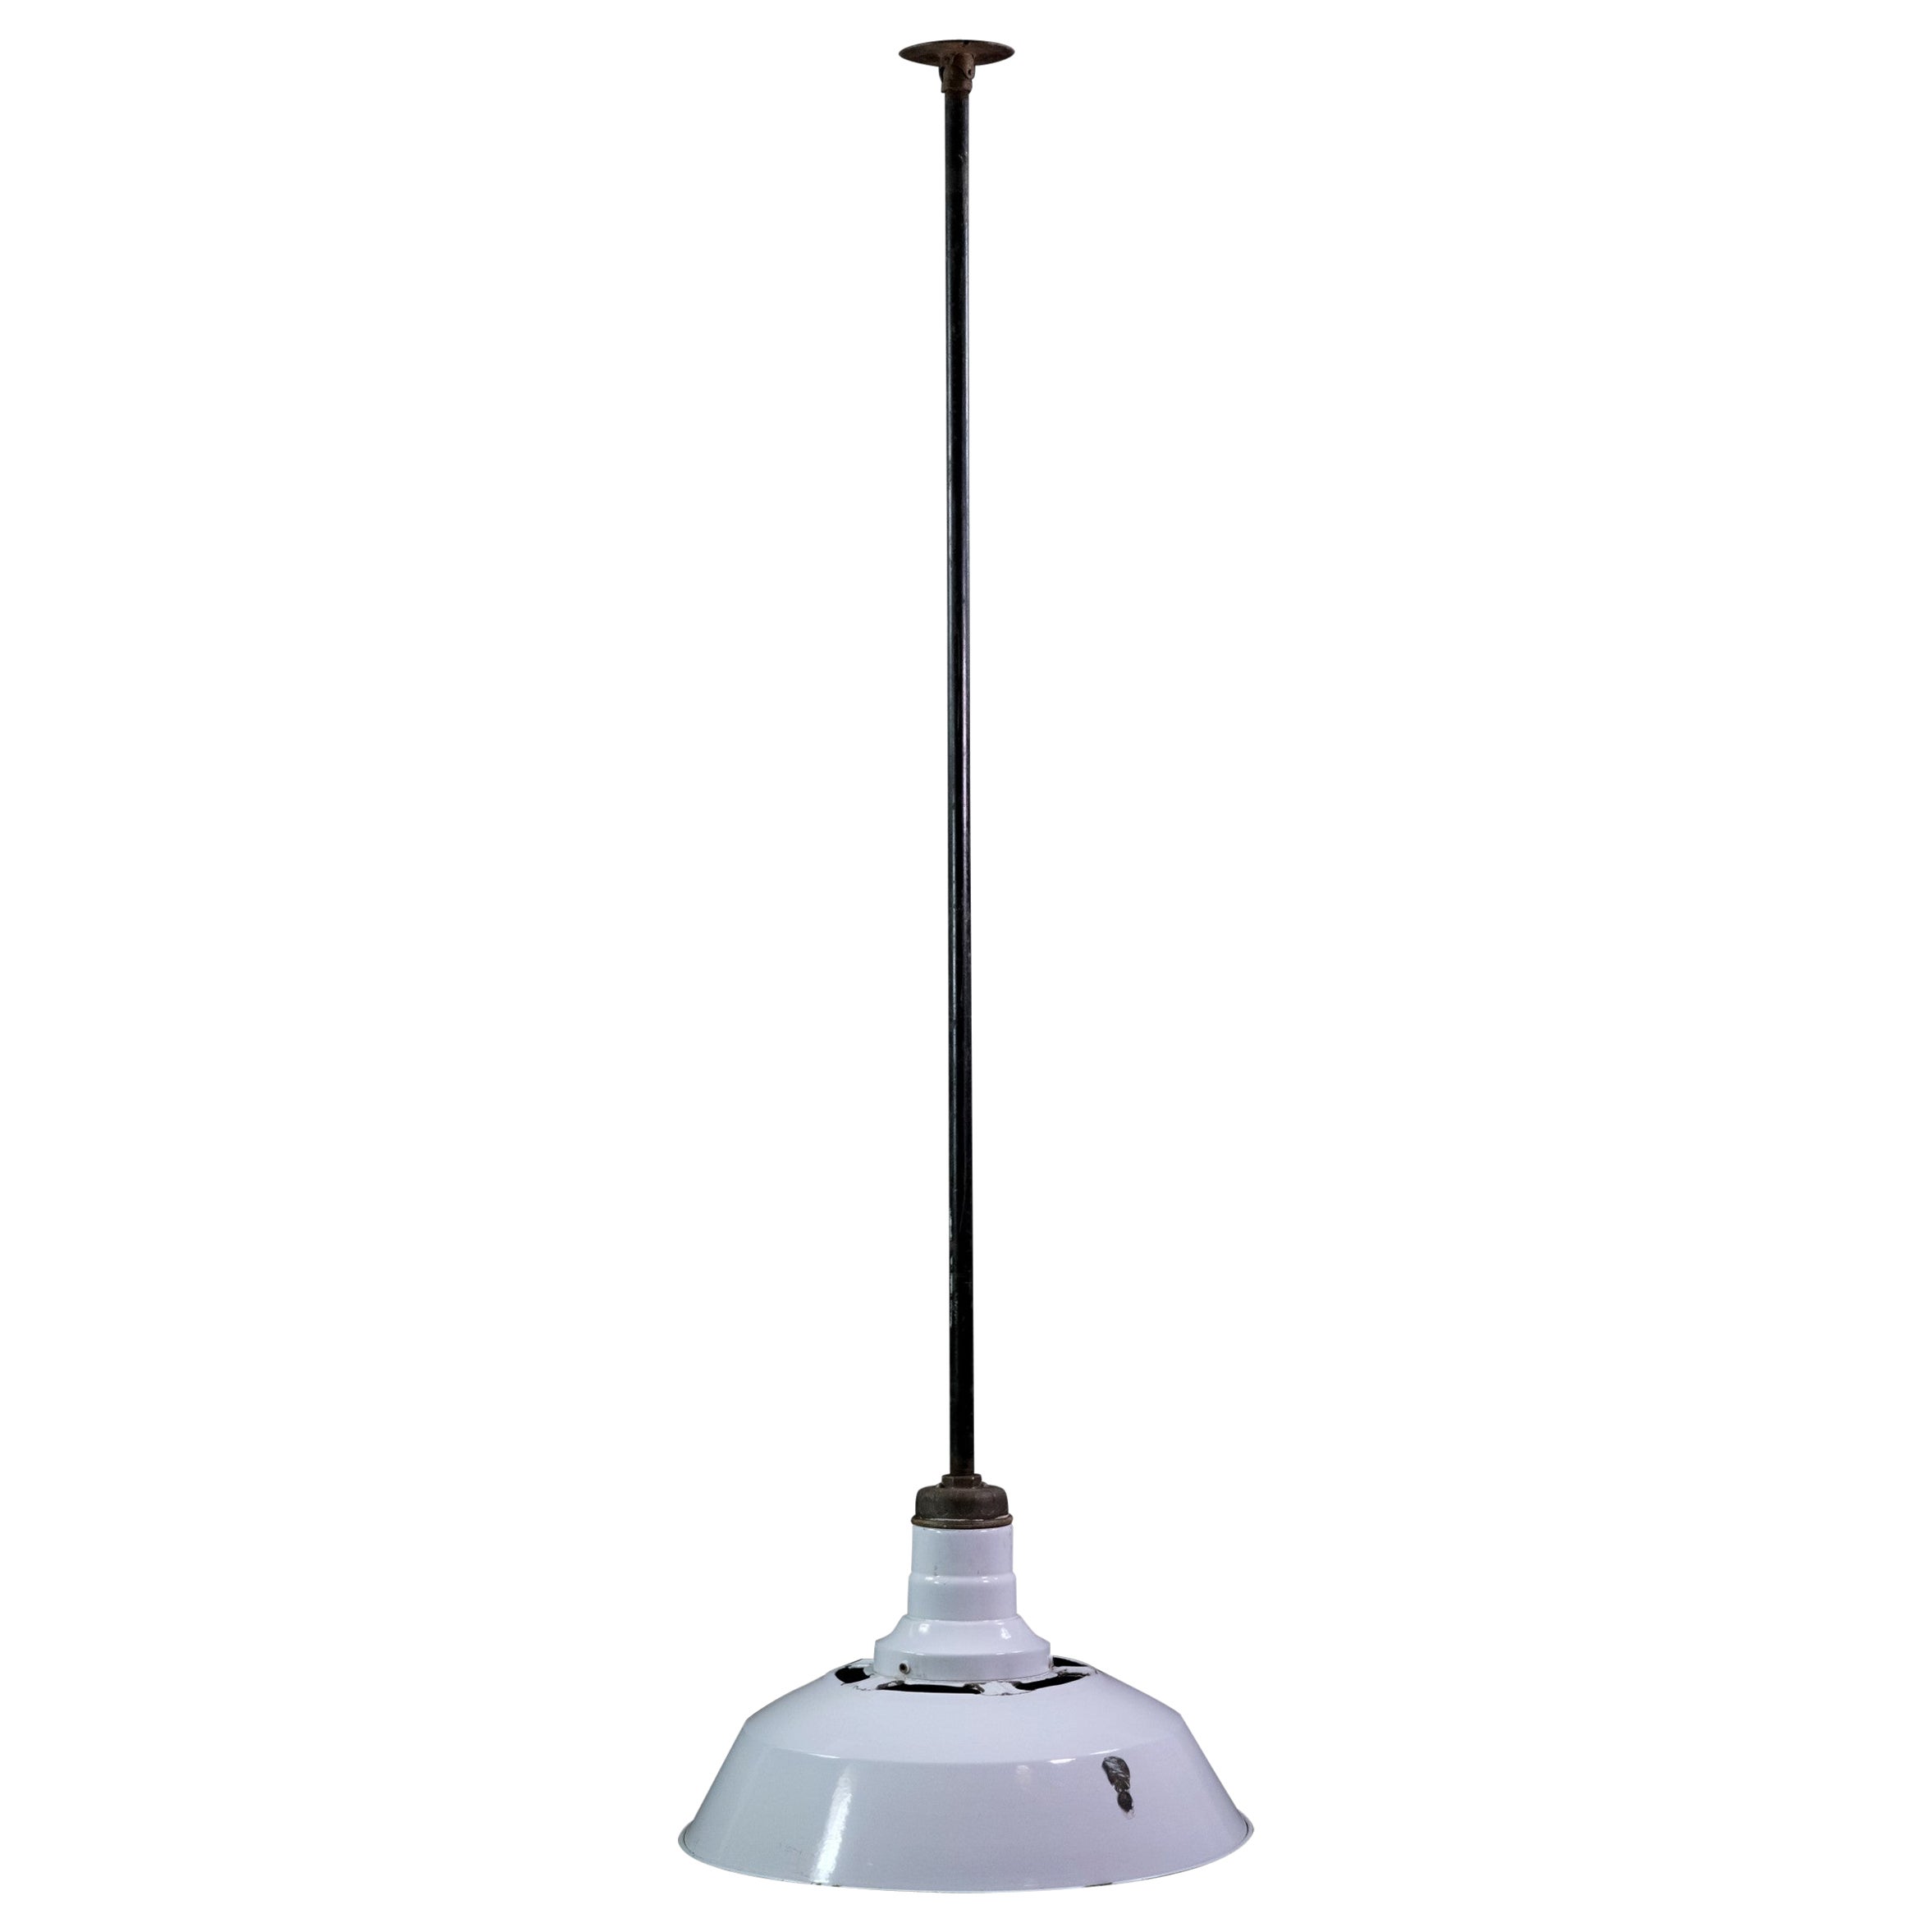 Industrial White Enamel Slotted Top Factory Pendant Light Quantity Available